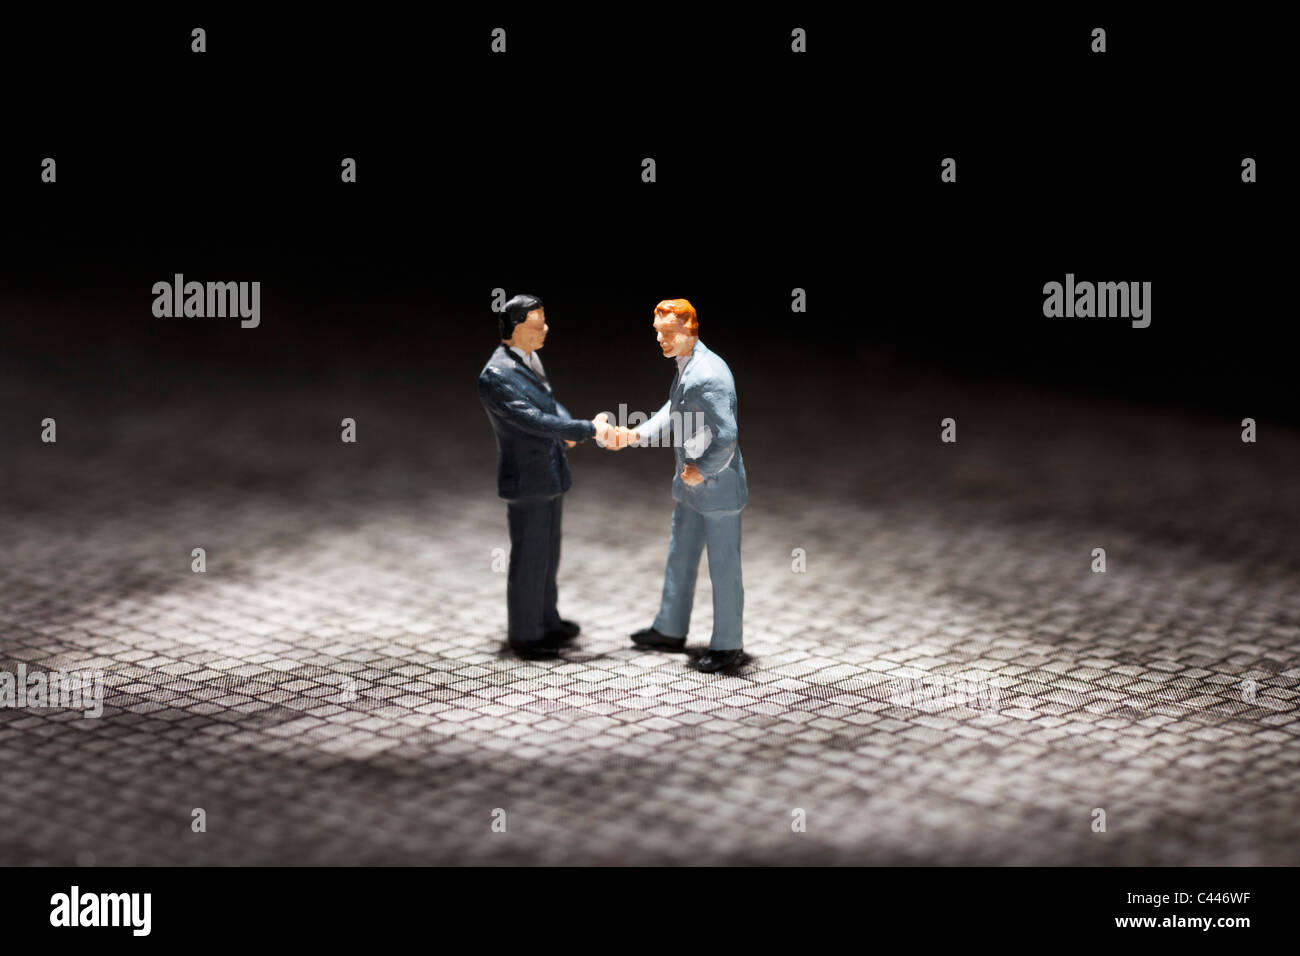 Two miniature businessmen figurines shaking hands Stock Photo